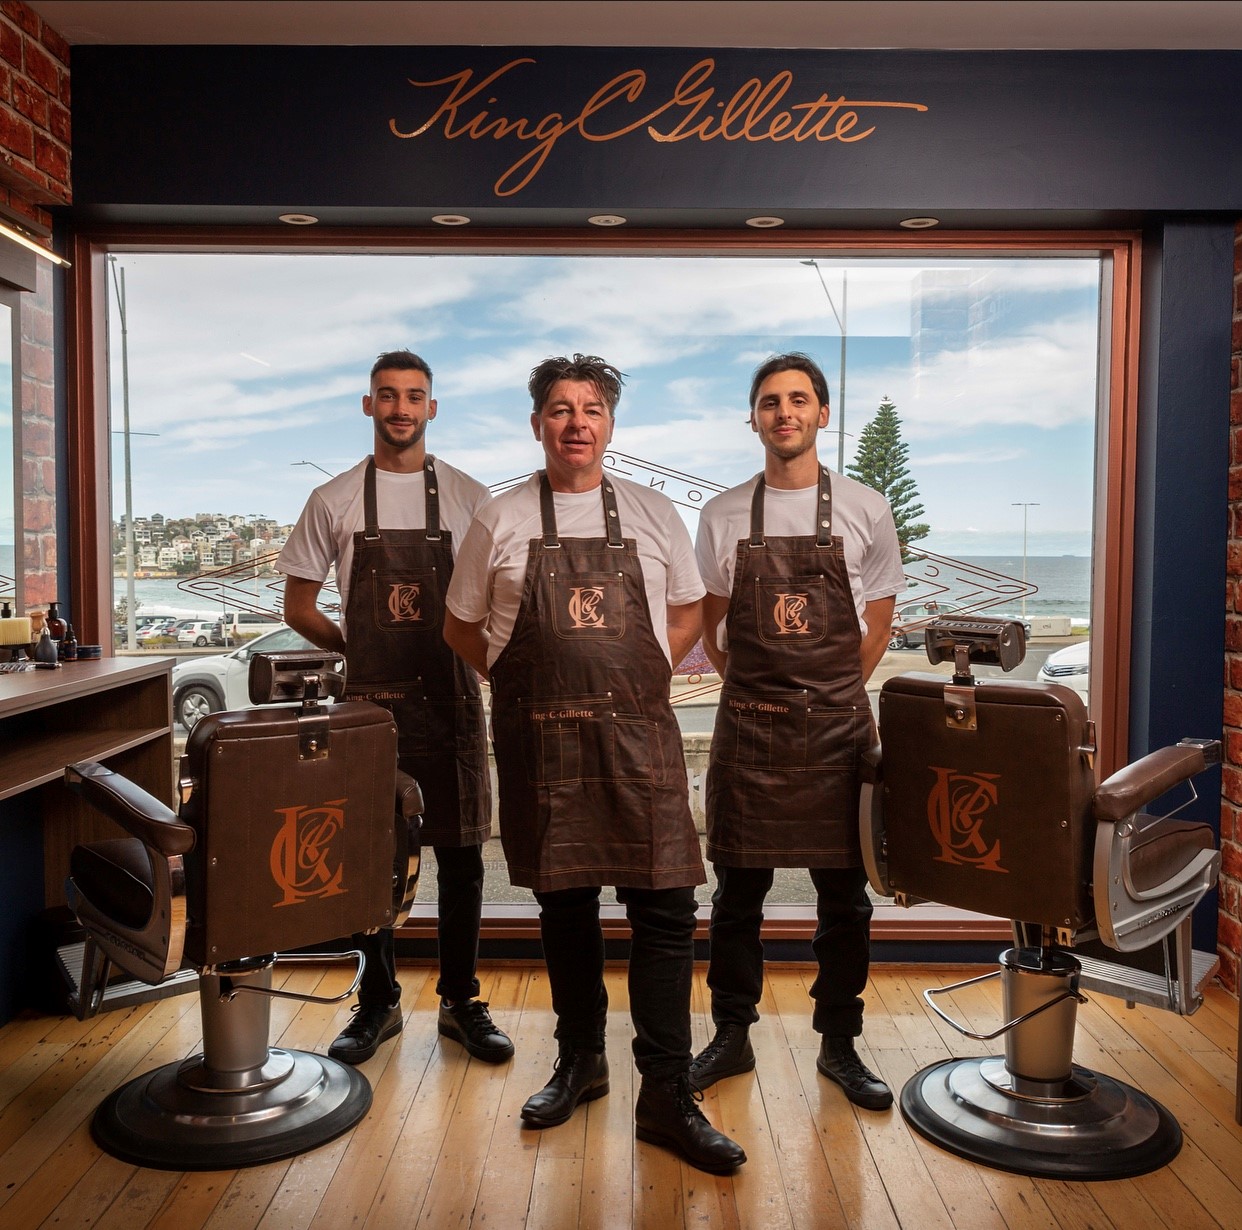 THE LAUNCH OF THE KING C GILLETTE BARBER SHOP